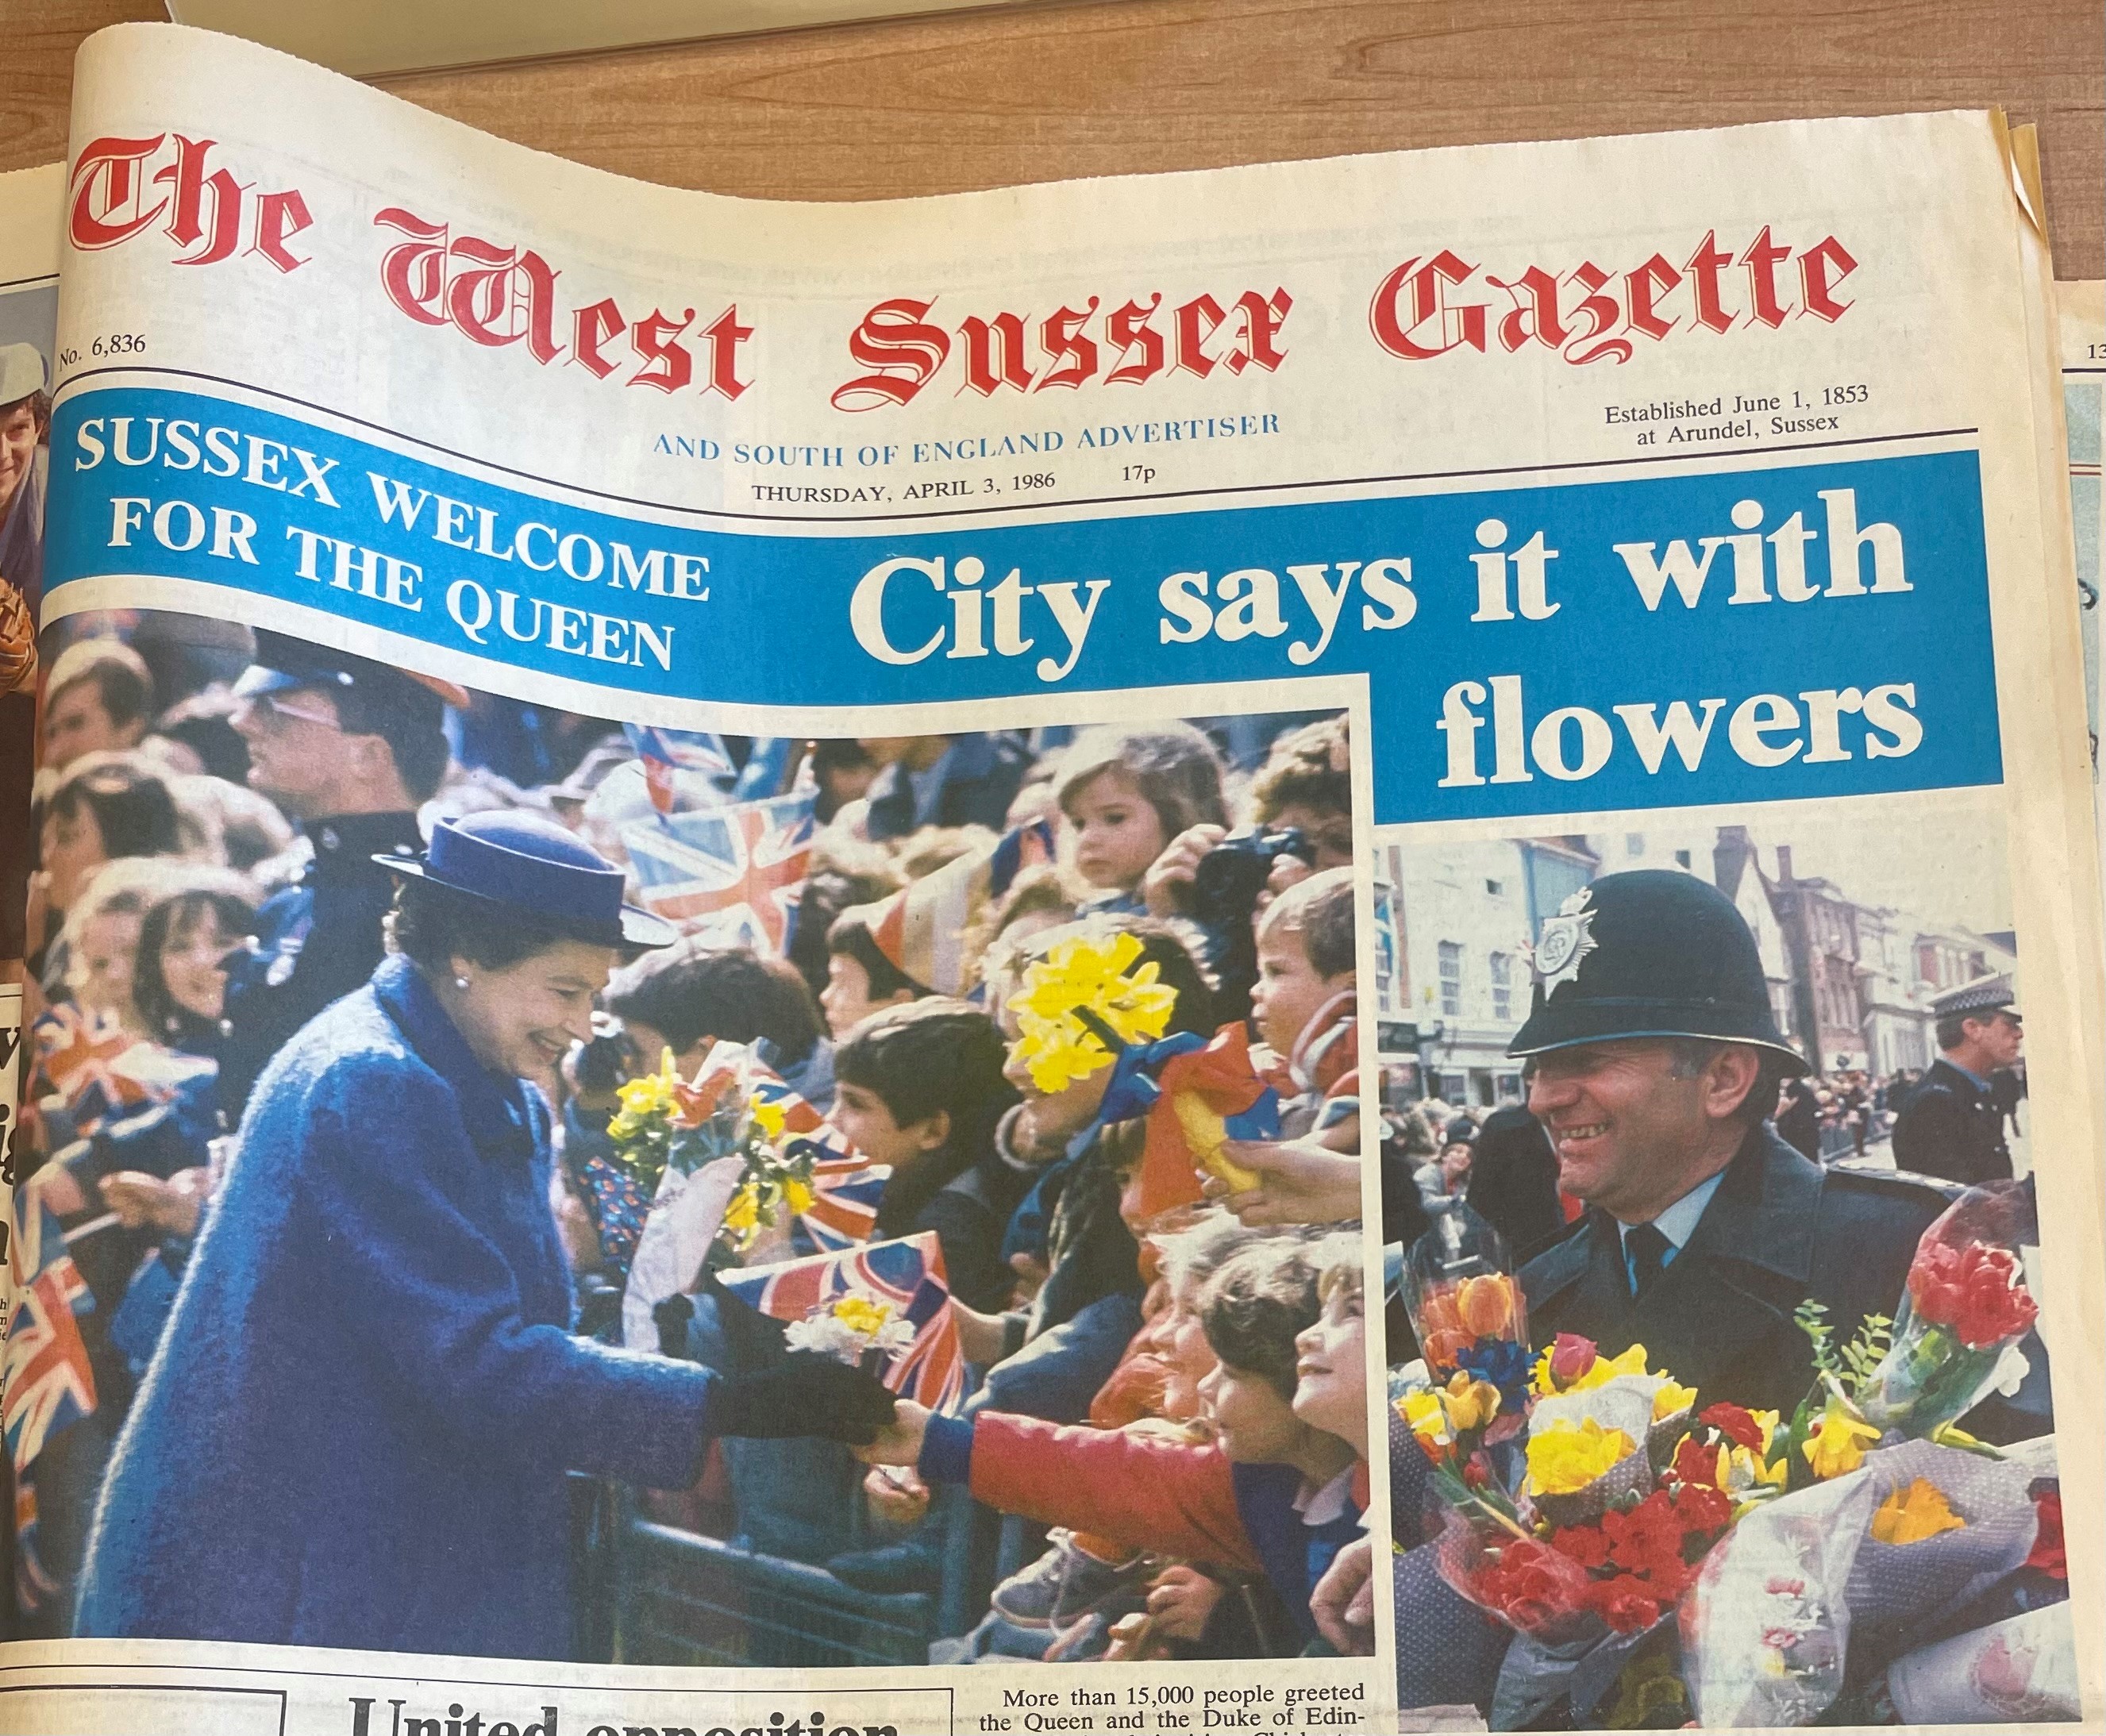 Front page of the WSG showing her majesty's visit to Chichester